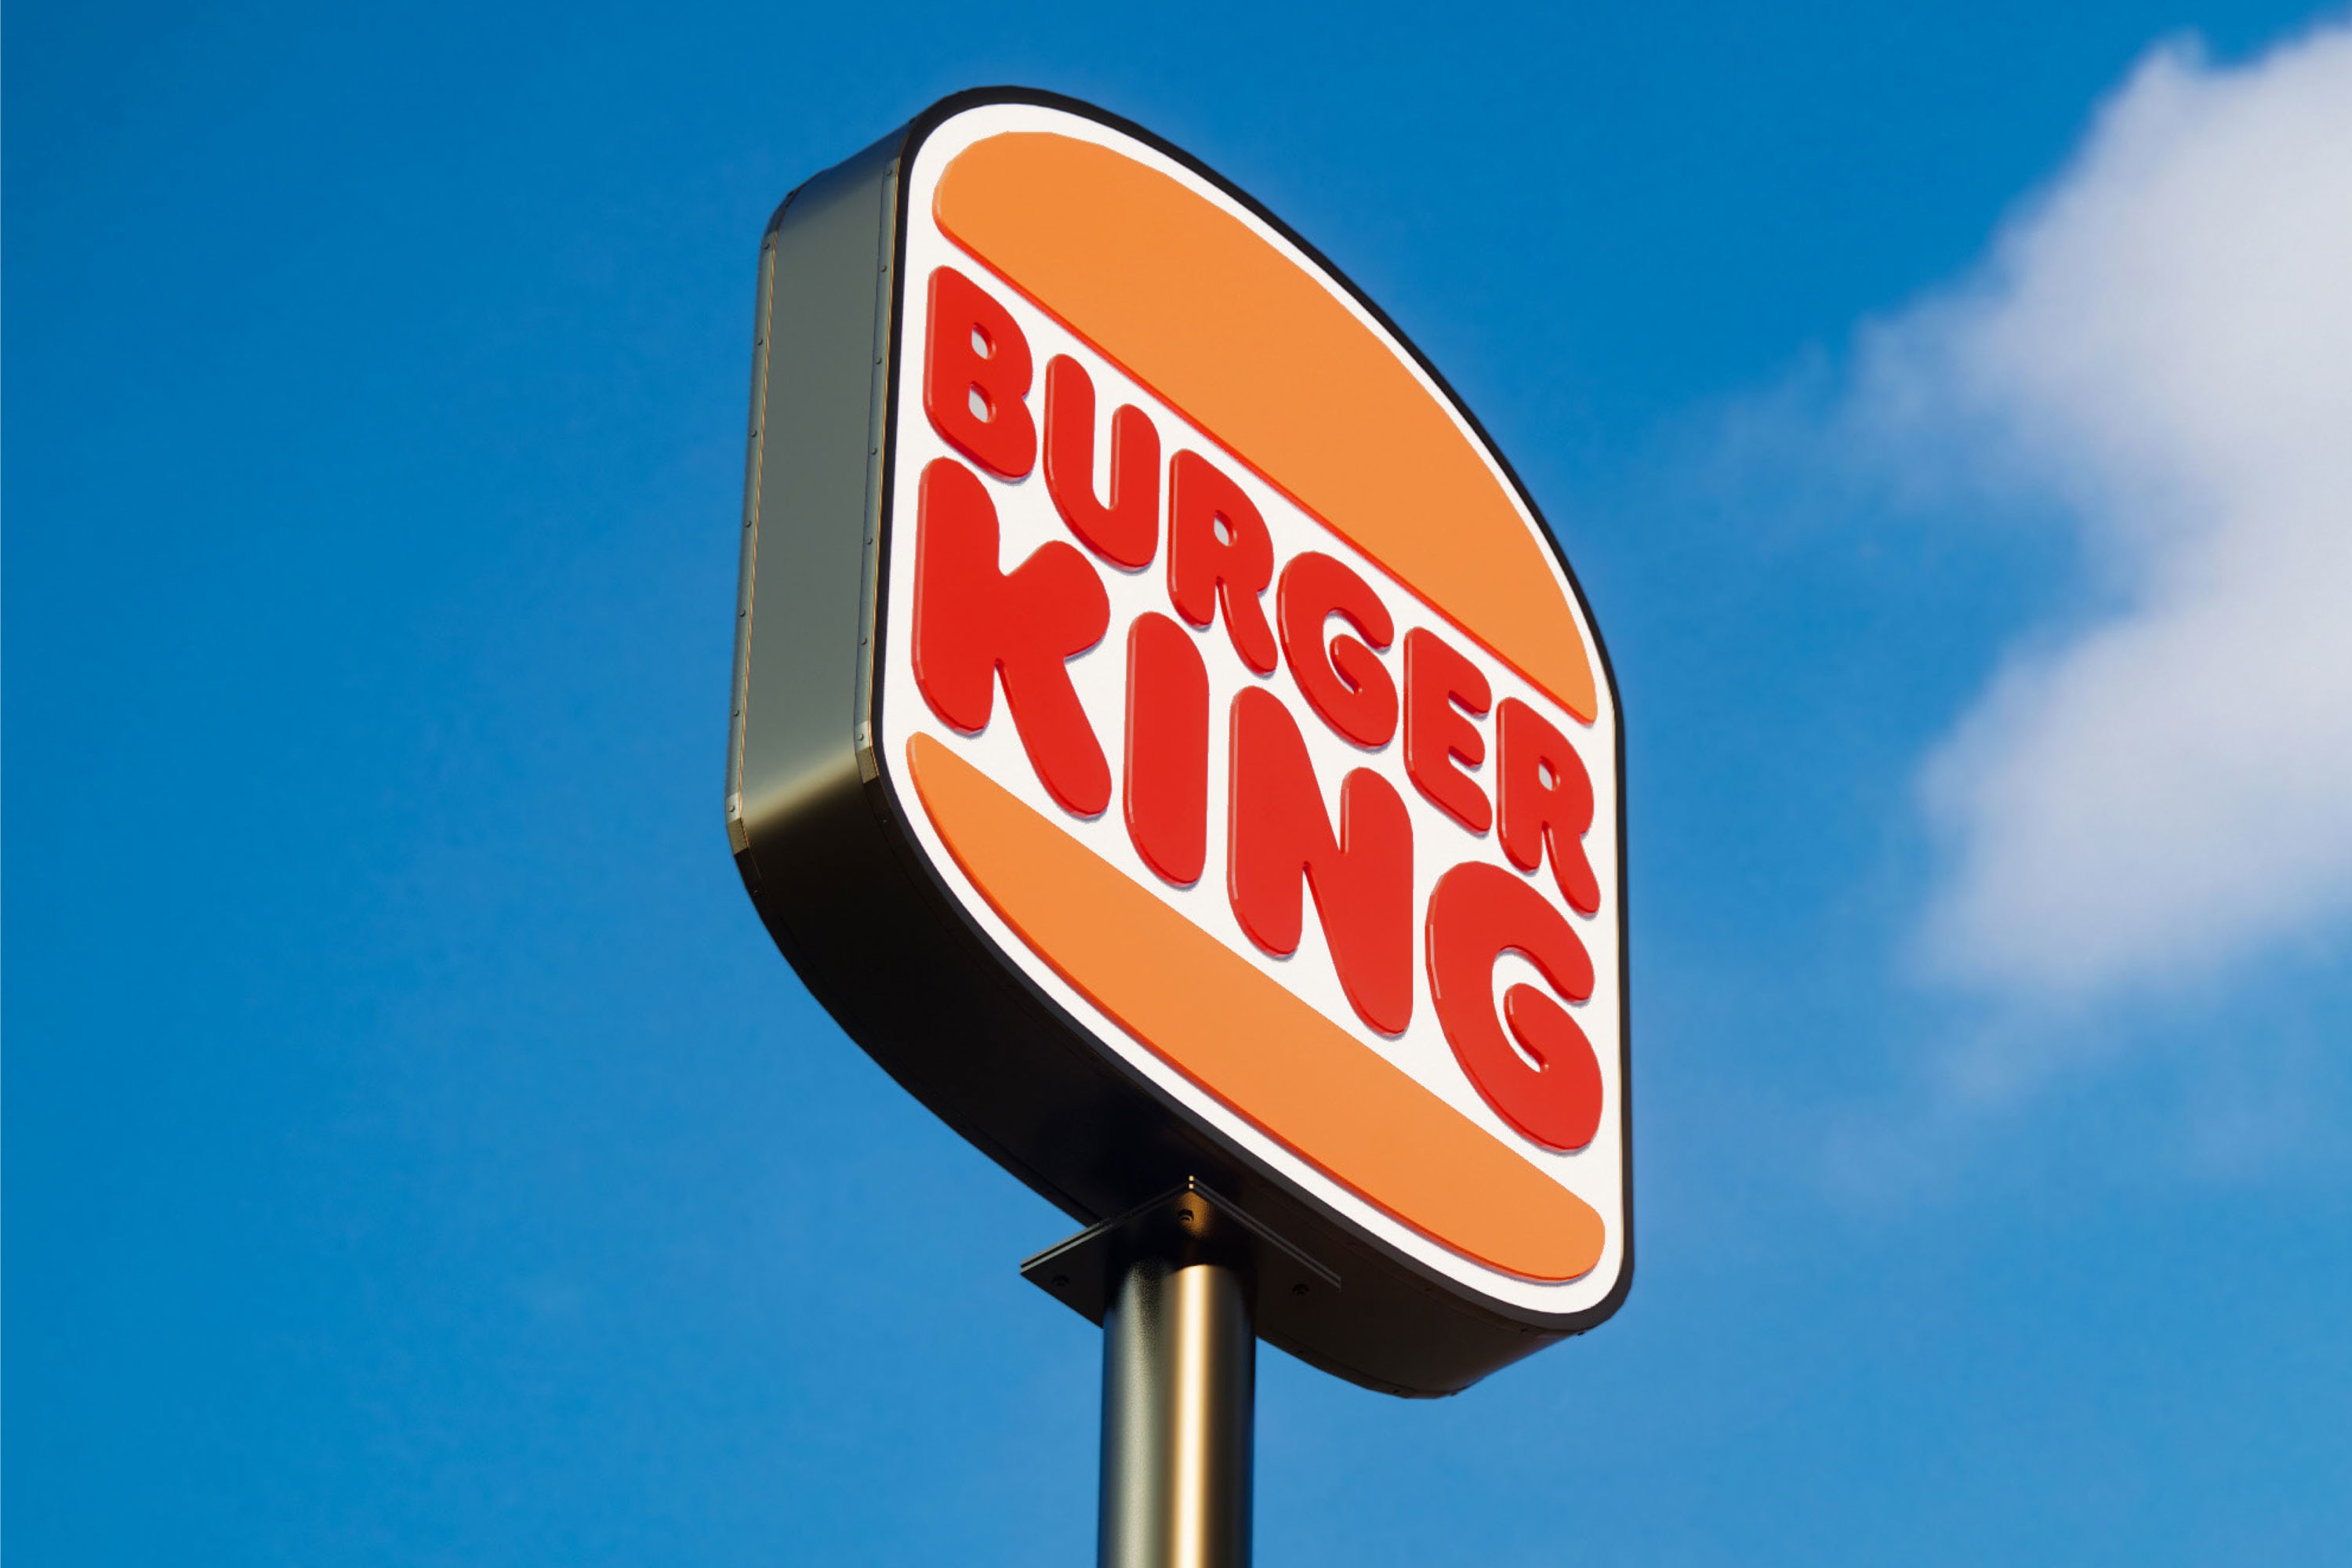 Burger King tests the loyalty program as part of the digital push